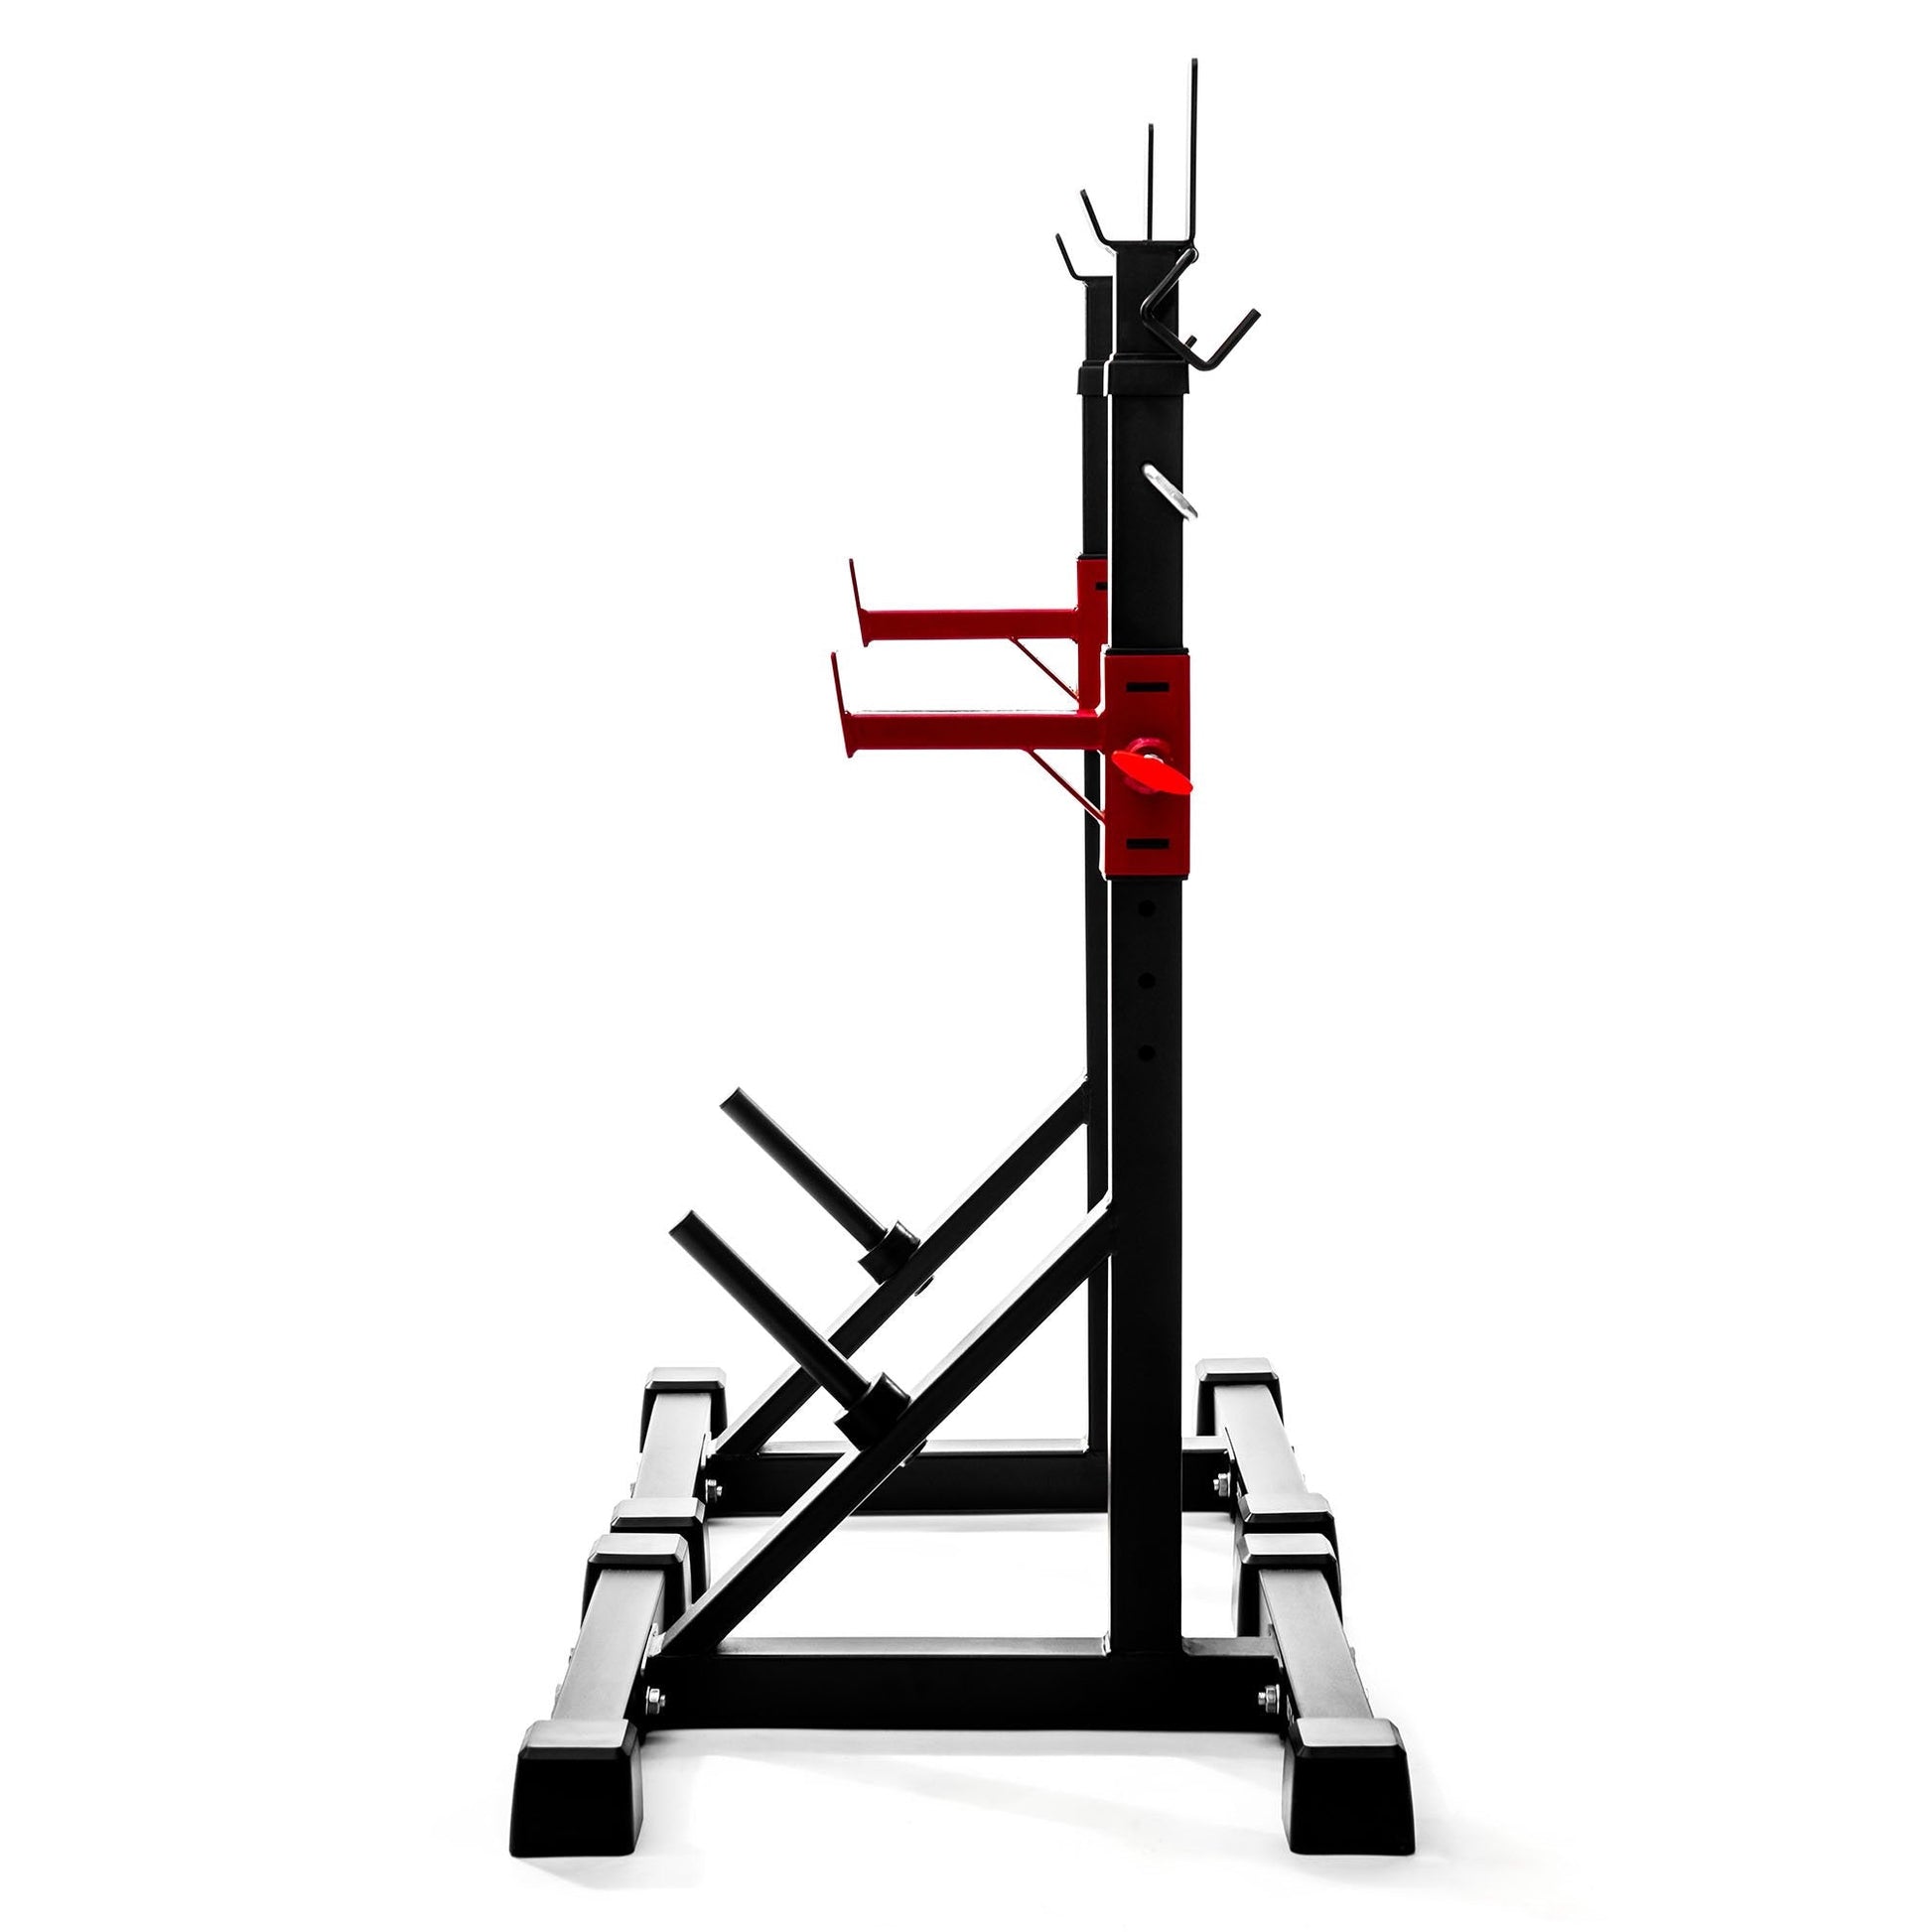 |Viavito ST1000 Adjustable Squat Stands with Barbell Spotter Catchers - Side|